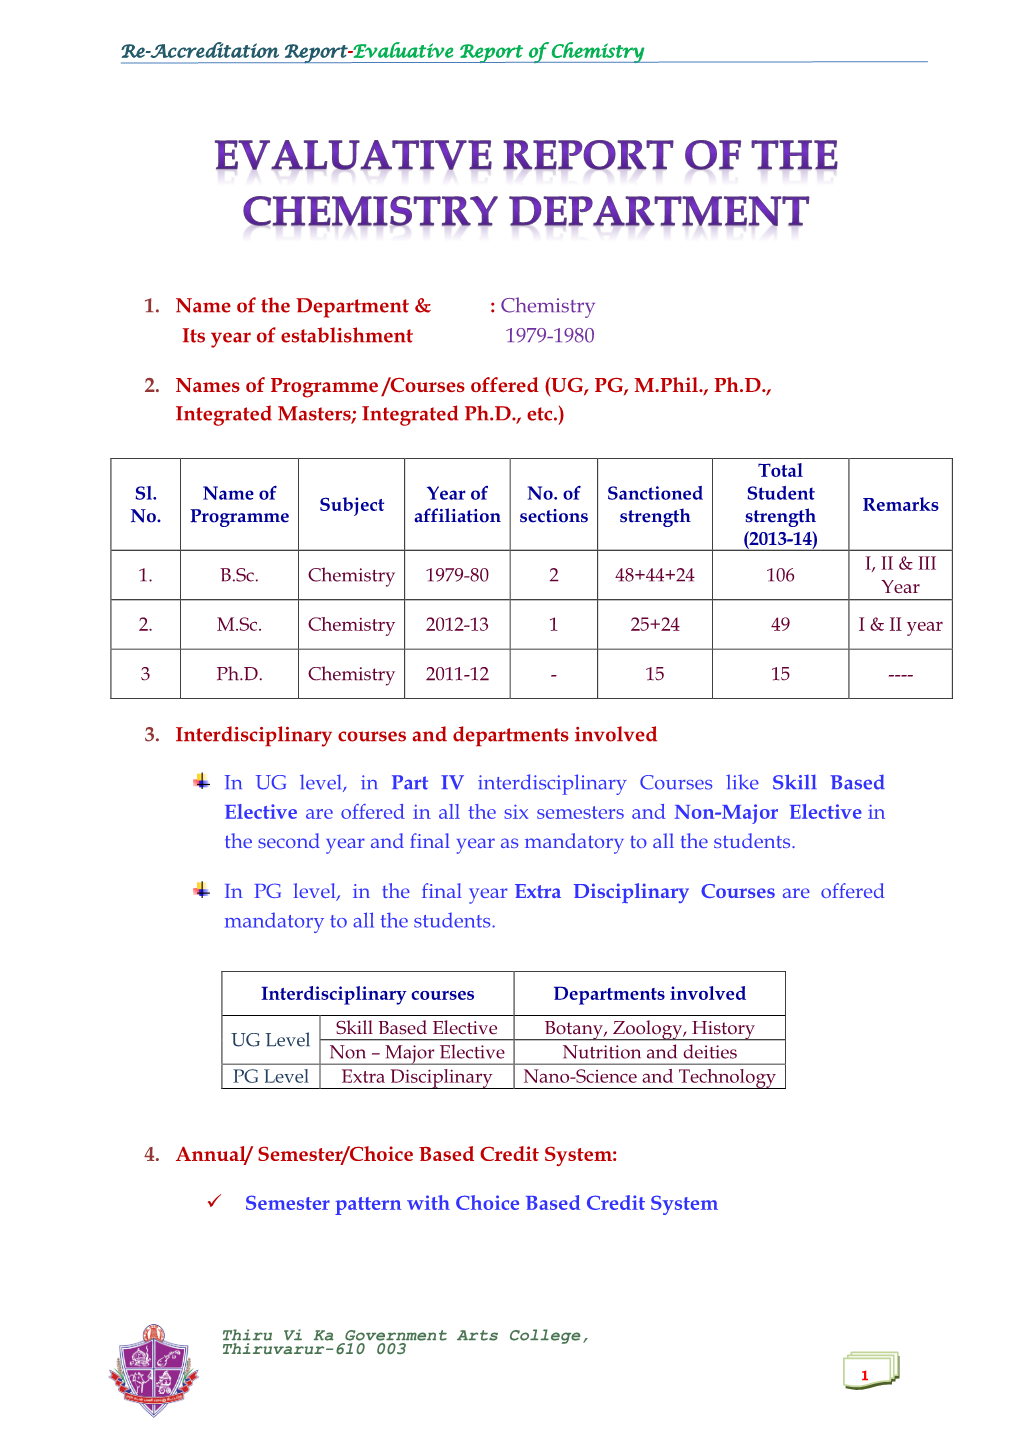 1. Name of the Department & : Chemistry Its Year of Establishment 1979-1980 2. Names of Programme /Courses Offered (UG